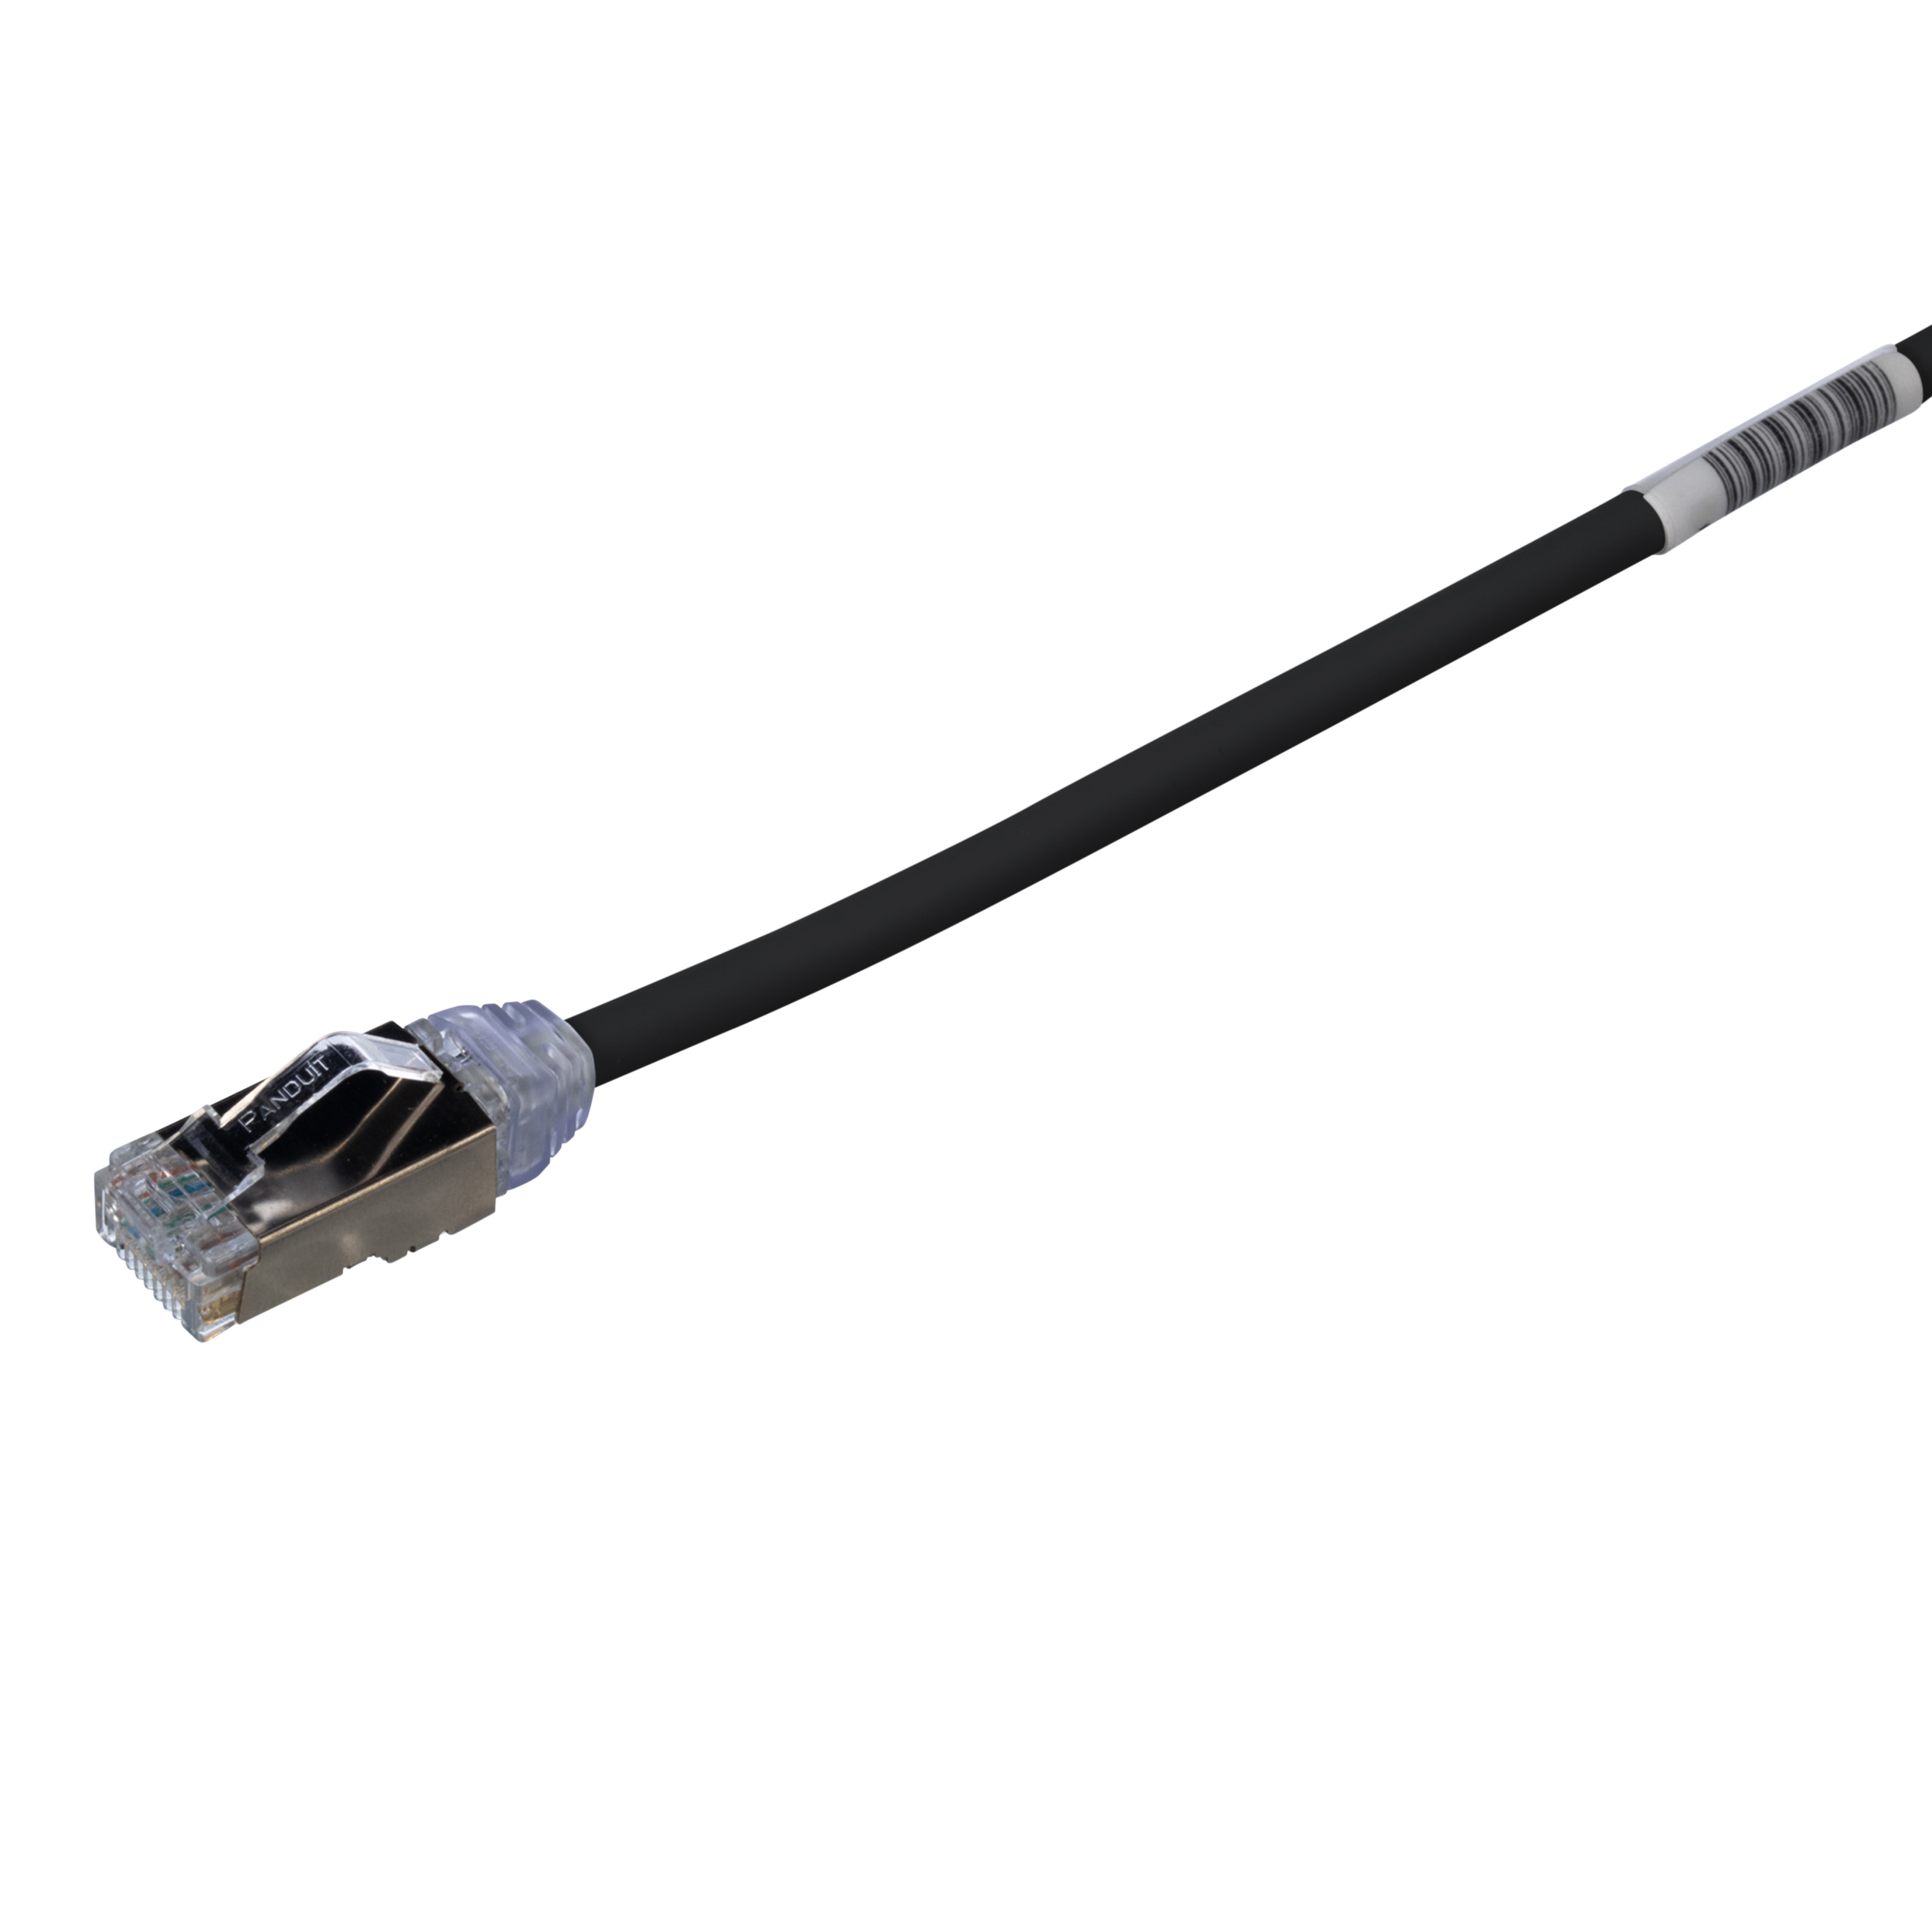 Cat 6A 28 AWG Shielded Patch Cord, 2 m, Black